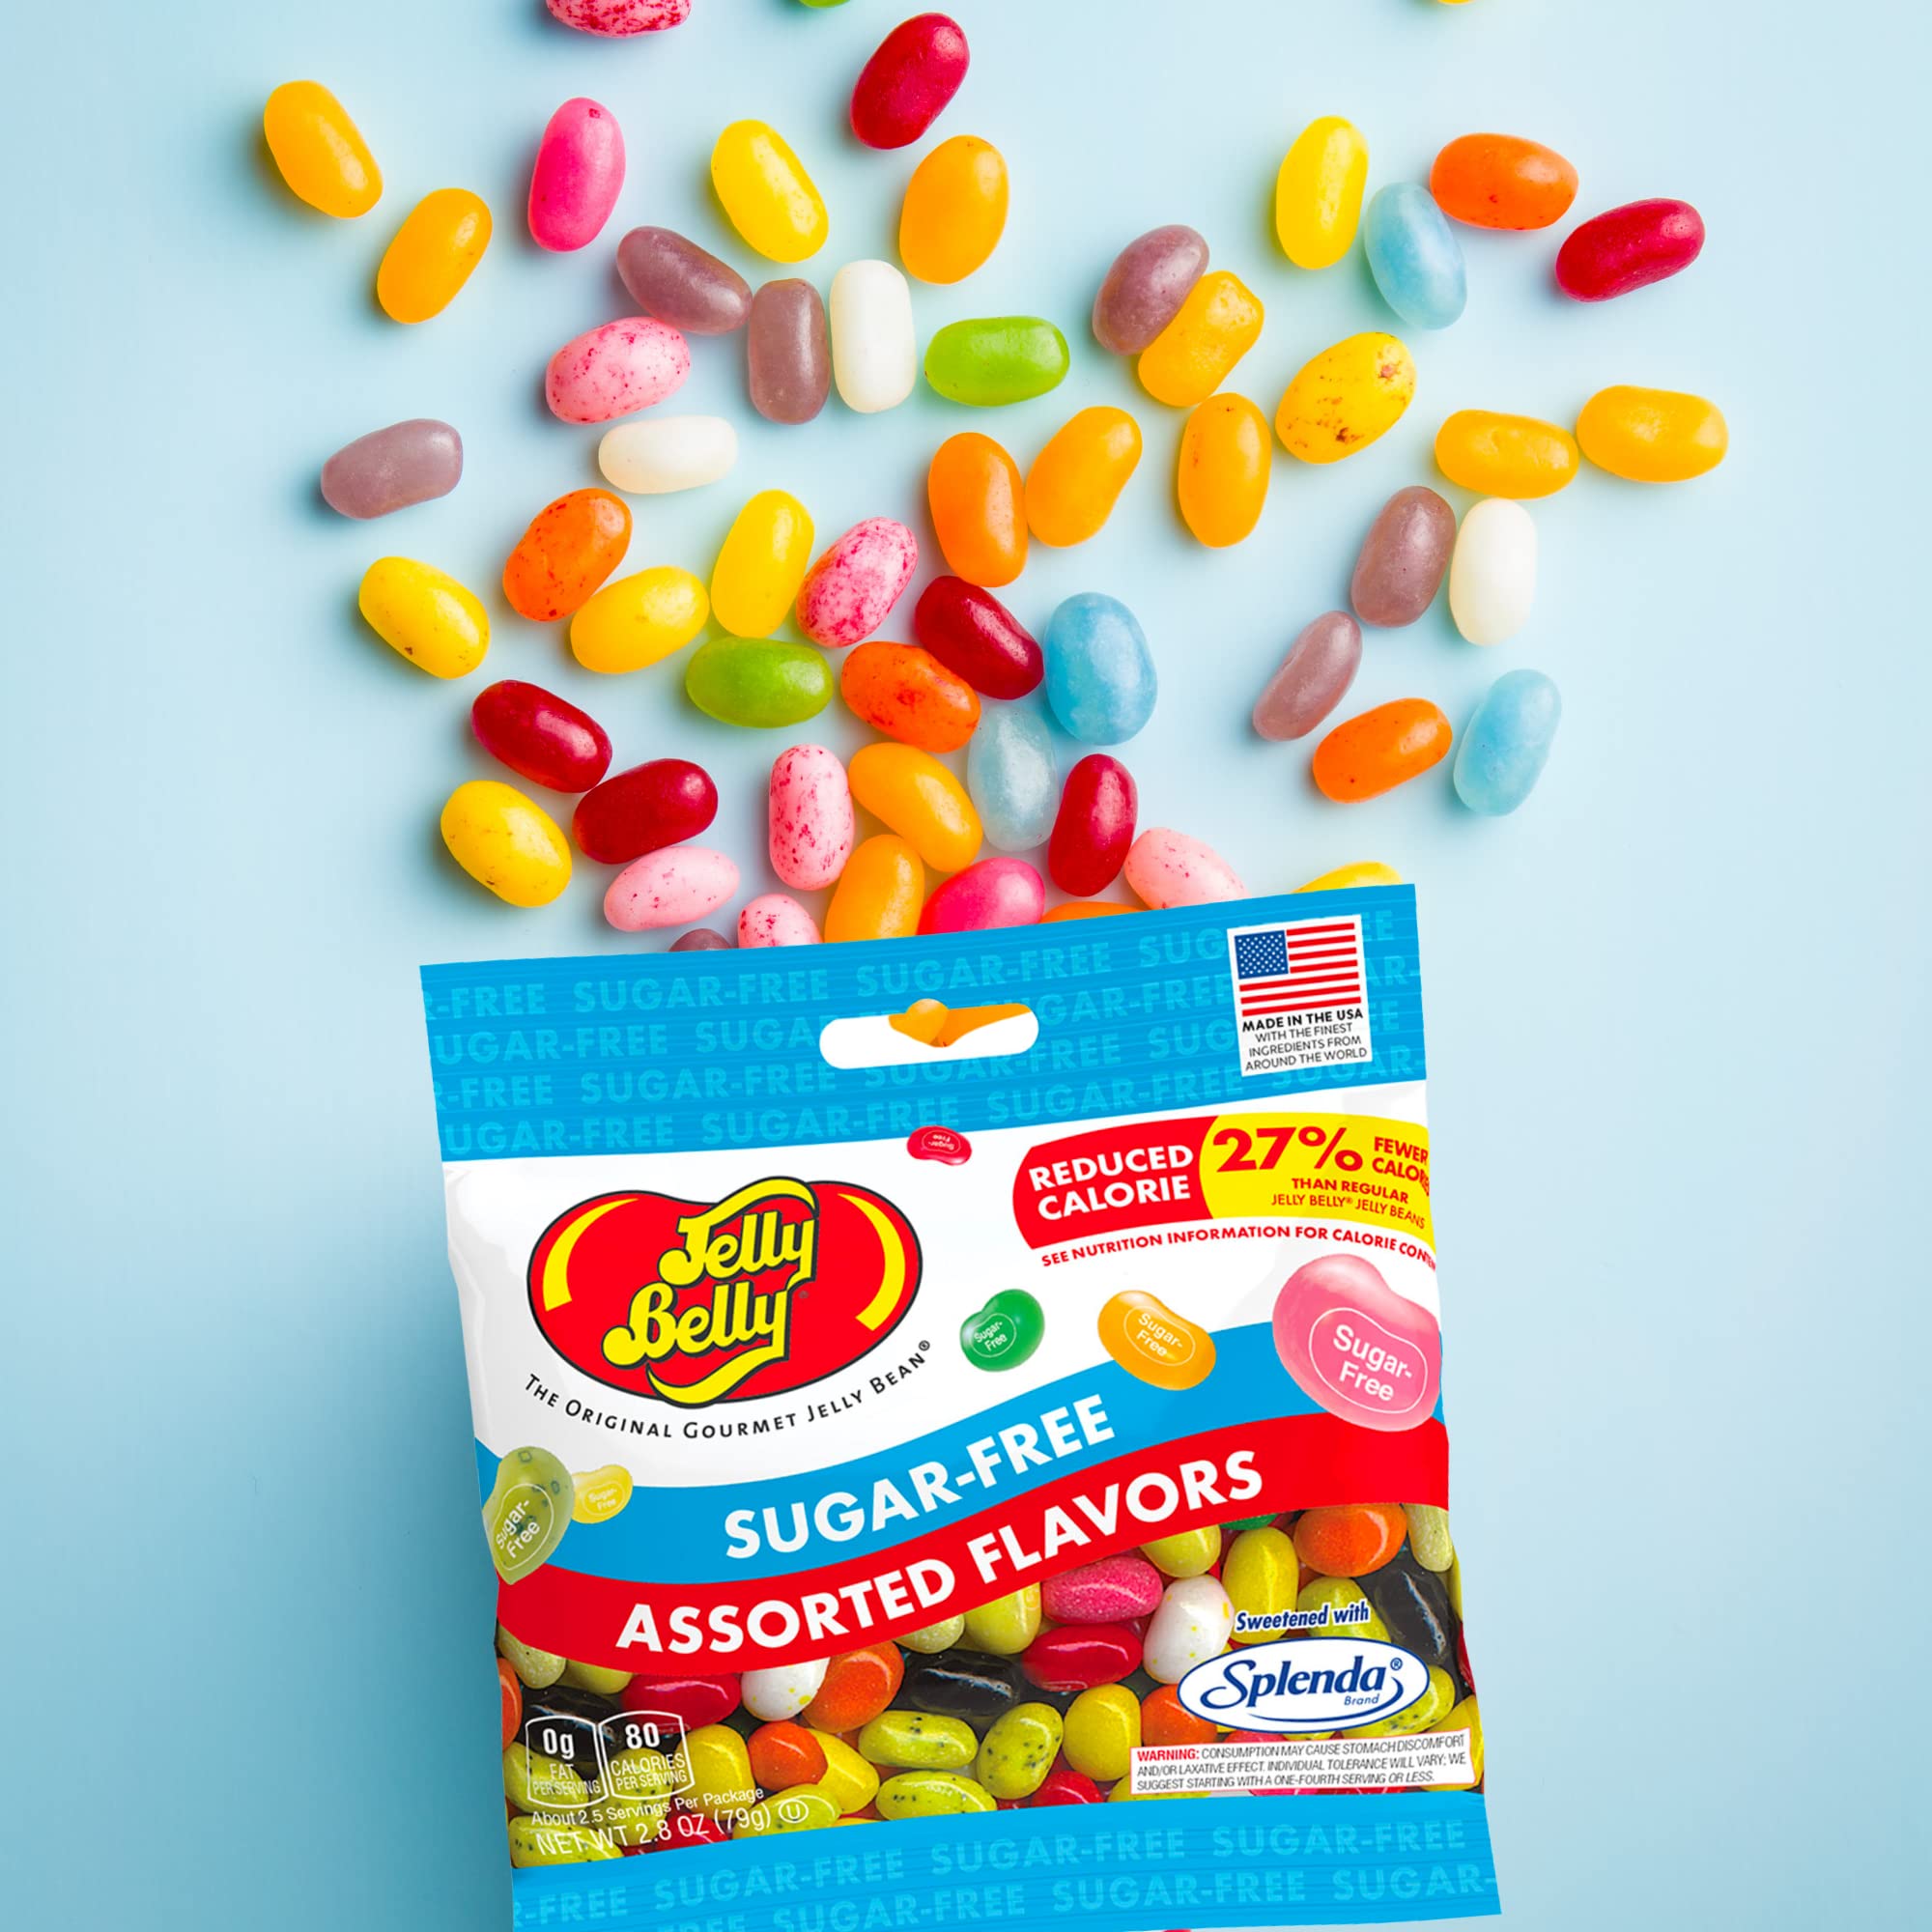 Sugar Free Jelly Beans, Sugar-Free Chewy Candies in Assorted Fruity Flavors, Low Calorie Shareable Sweet Snacks, 2.8 ounce bags, Pack of 3